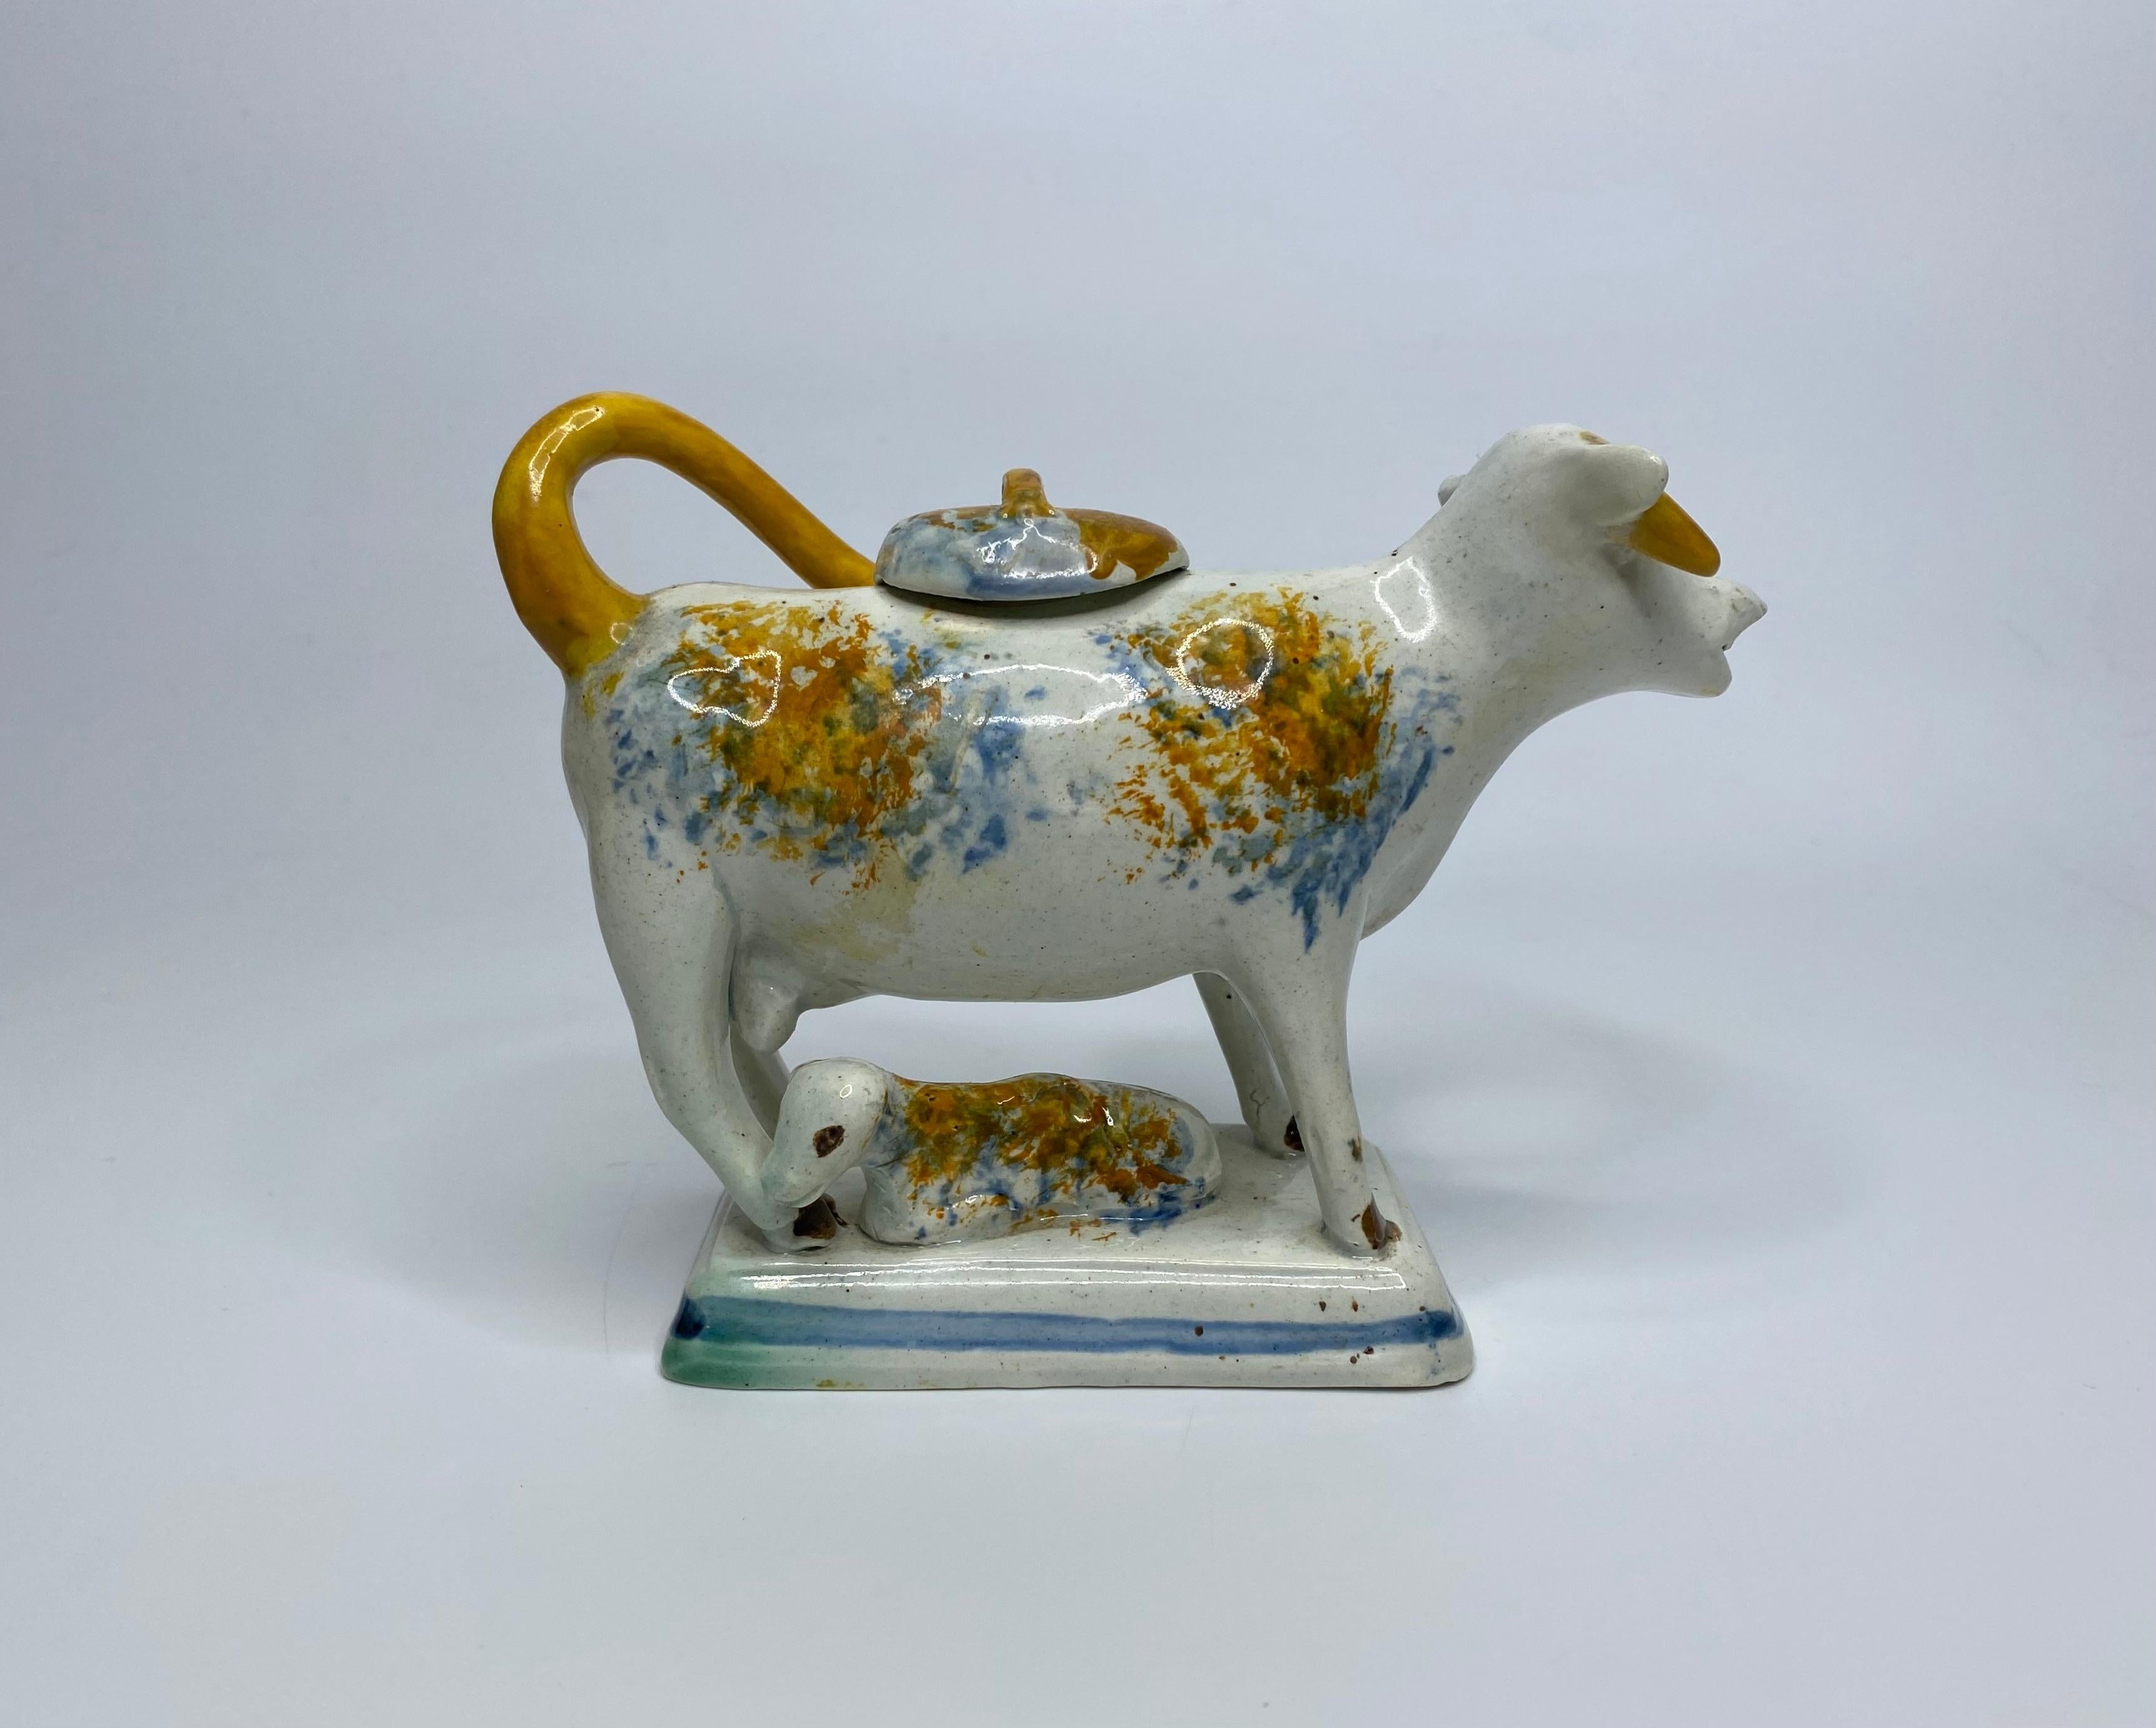 English pottery cow creamer, Staffordshire or Yorkshire potteries, c. 1810. The naively potted cow standing upon a rectangular base, with its calf, recumbent at her side.
Painted with Pratt type spots, and colouring to the tail, horns, and cover.